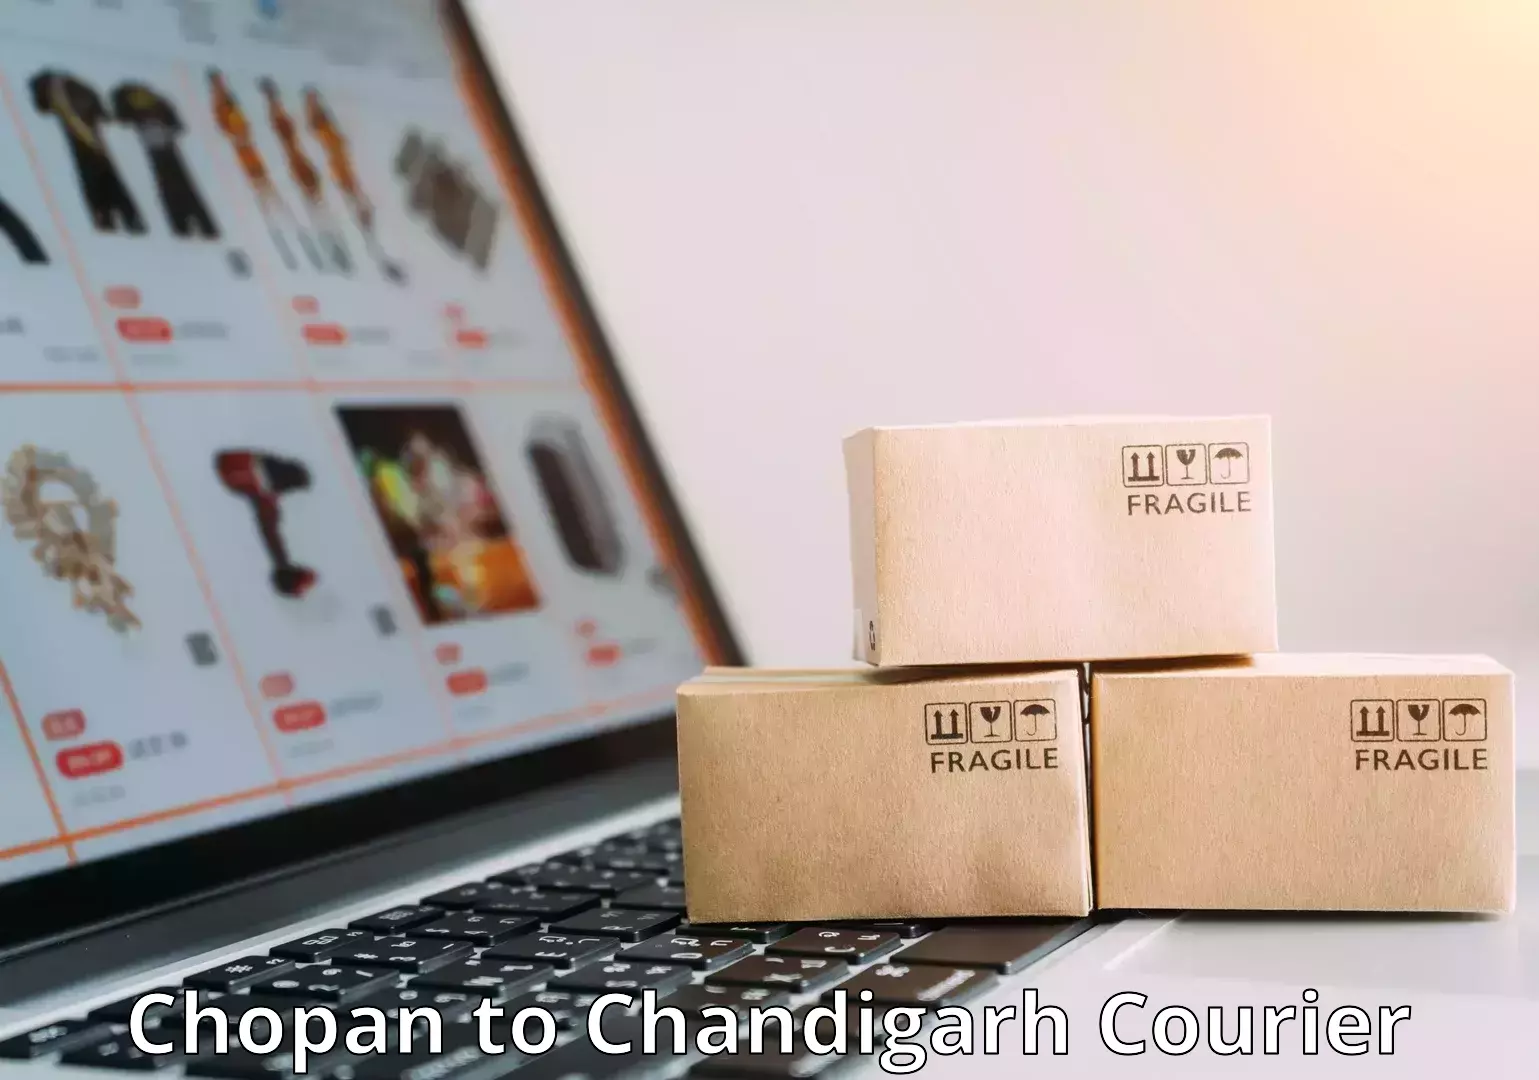 Luggage transport consultancy Chopan to Chandigarh